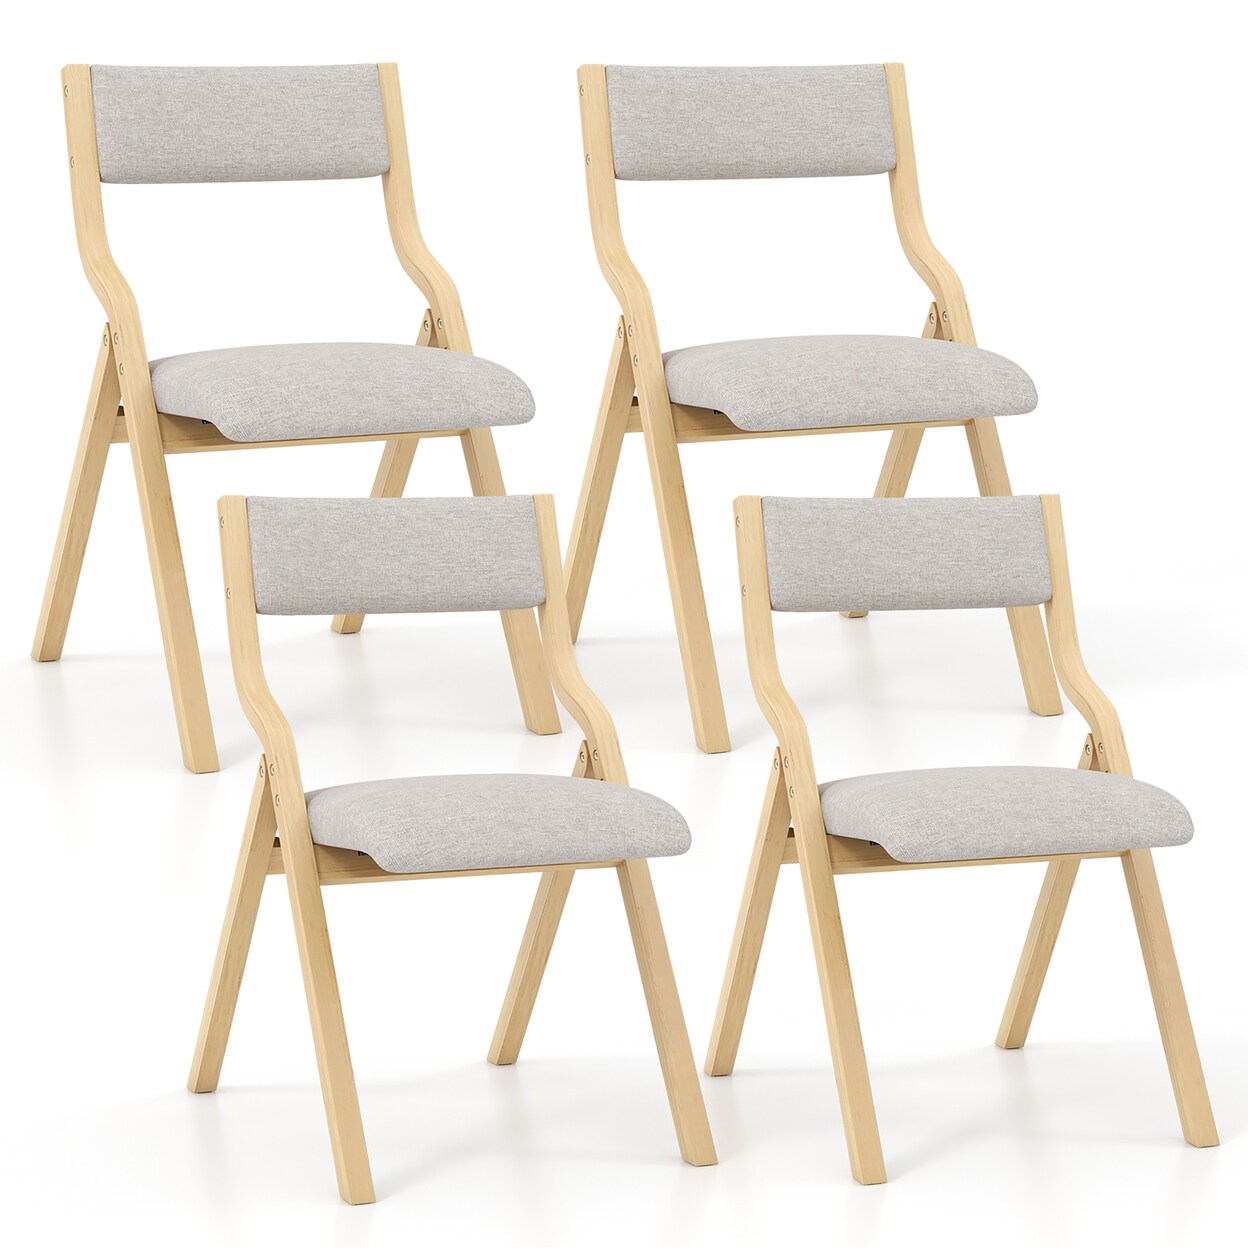 Gymax Folding Dining Chairs Set of 4 Wooden Table Chairs w/ Padded Seat Modern Grey and Natural